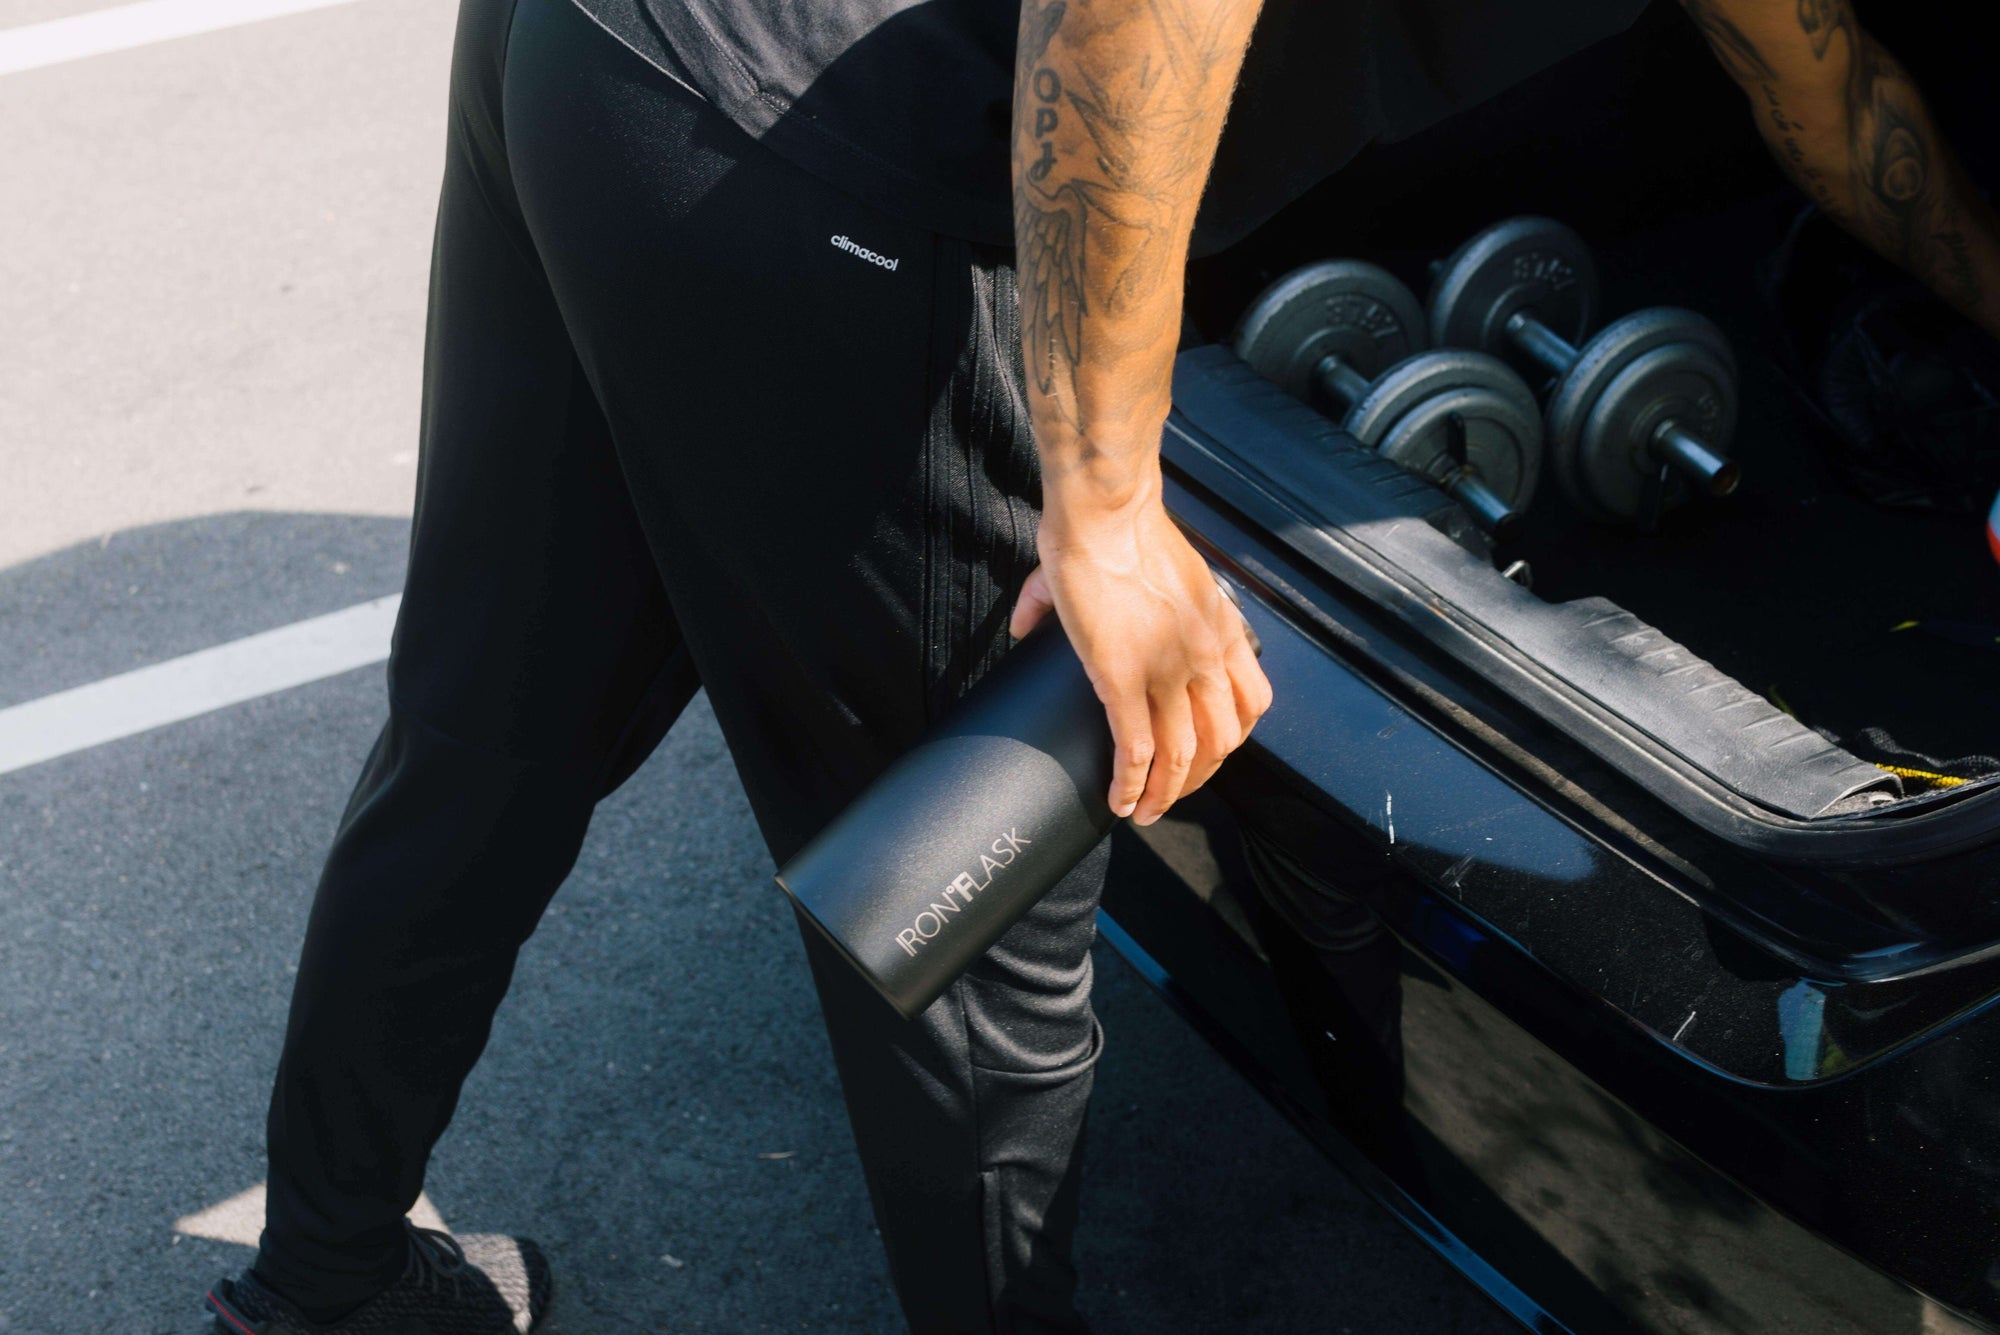 7 Workout Gear & Gym Bag Essentials to Bring to the Gym